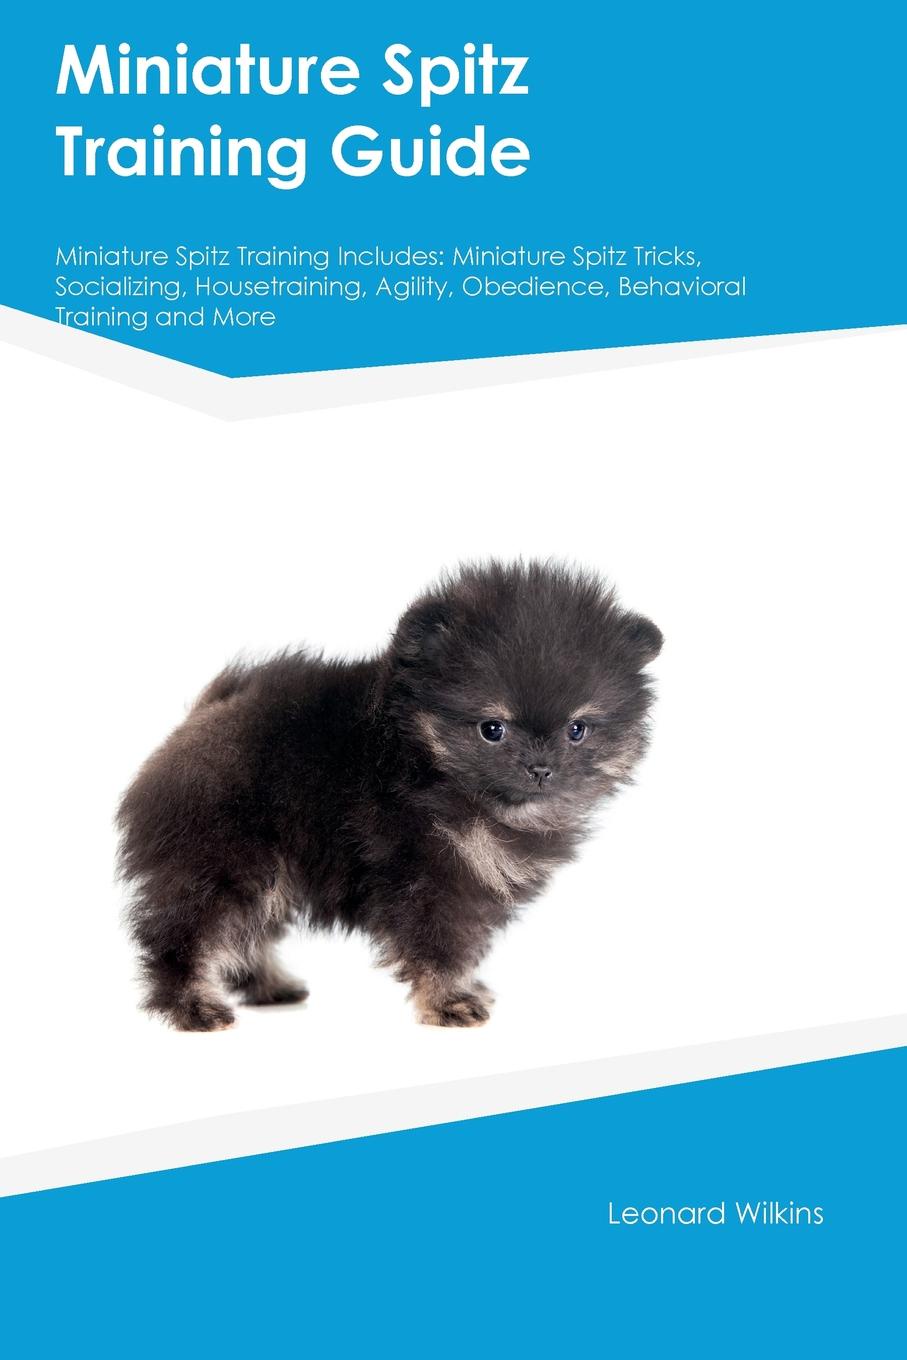 Miniature Spitz Training Guide Miniature Spitz Training Includes. Miniature Spitz Tricks, Socializing, Housetraining, Agility, Obedience, Behavioral Training and More